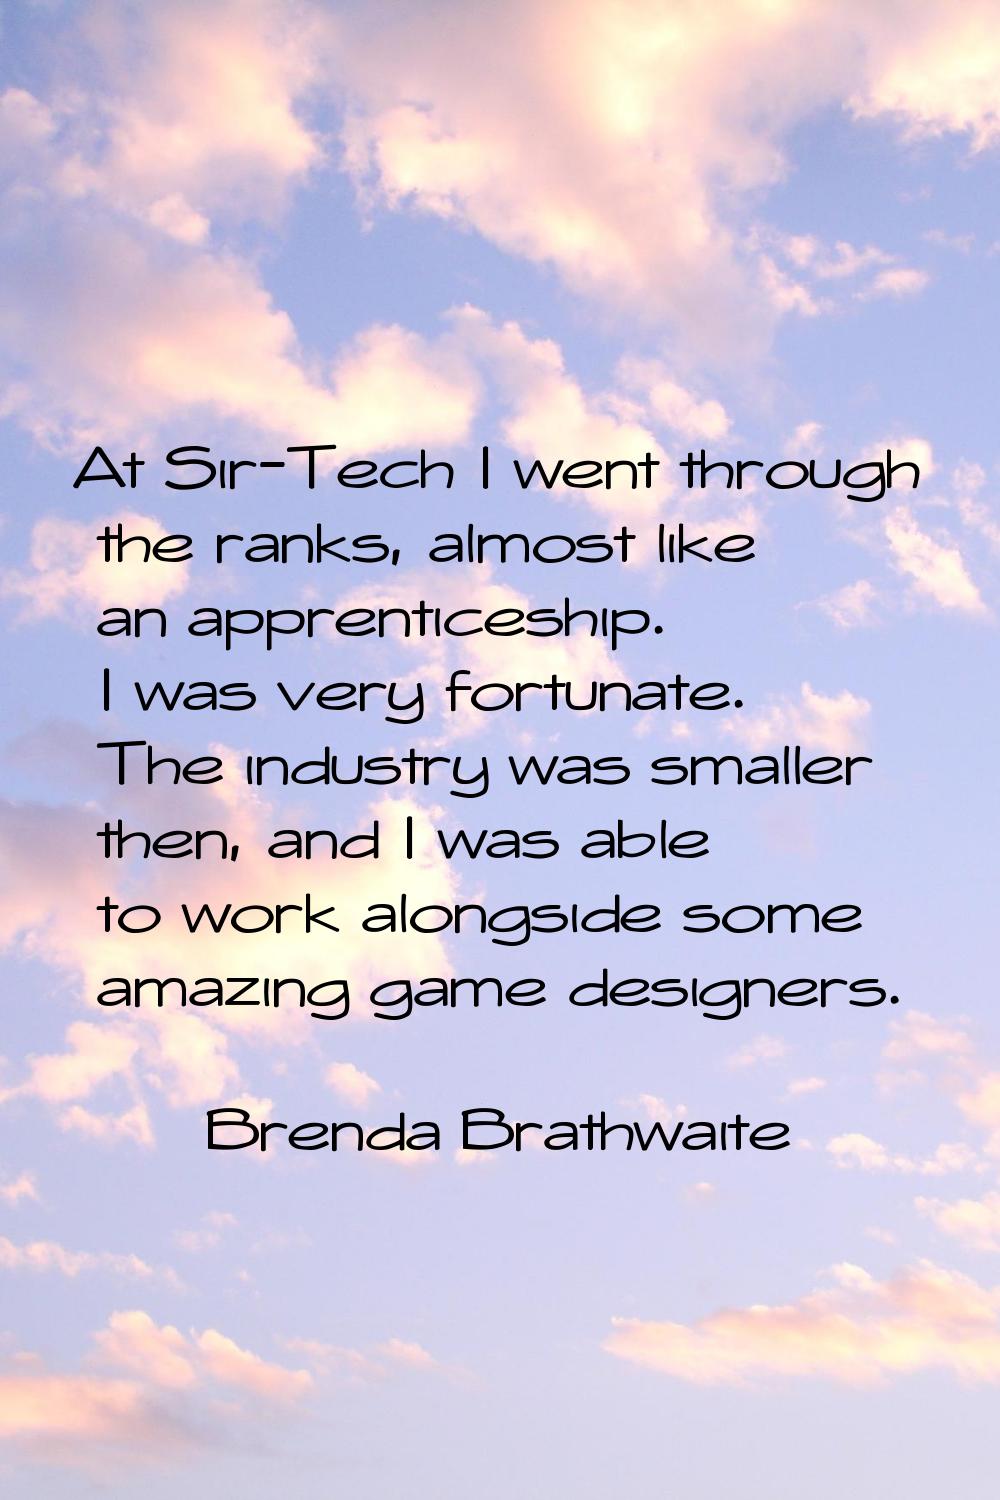 At Sir-Tech I went through the ranks, almost like an apprenticeship. I was very fortunate. The indu